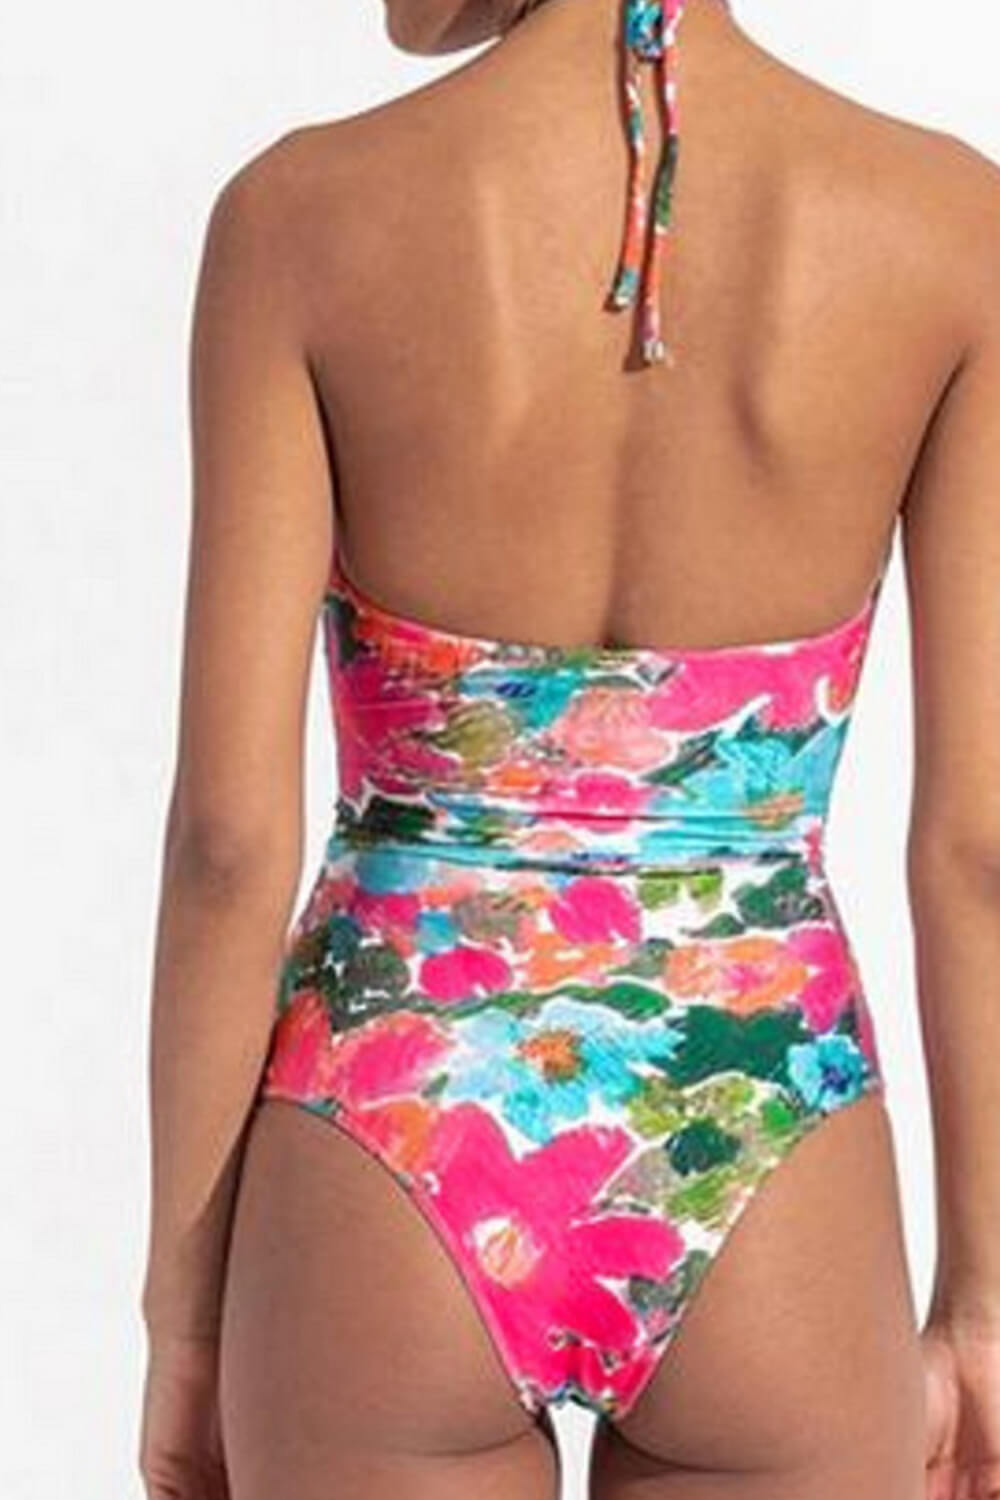 Floral Laceup Crossover Halterneck One Piece Swimsuit